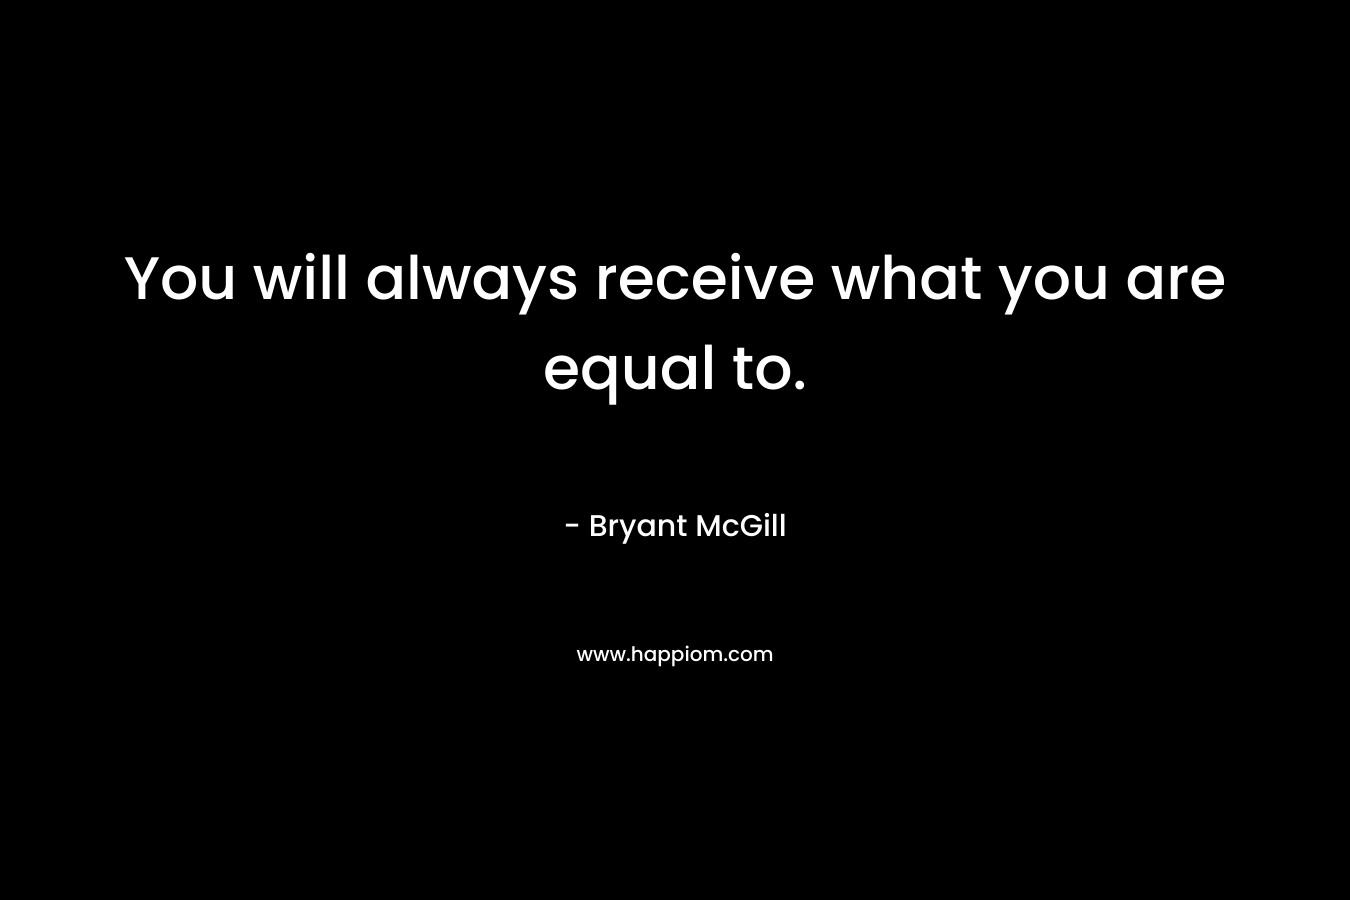 You will always receive what you are equal to.